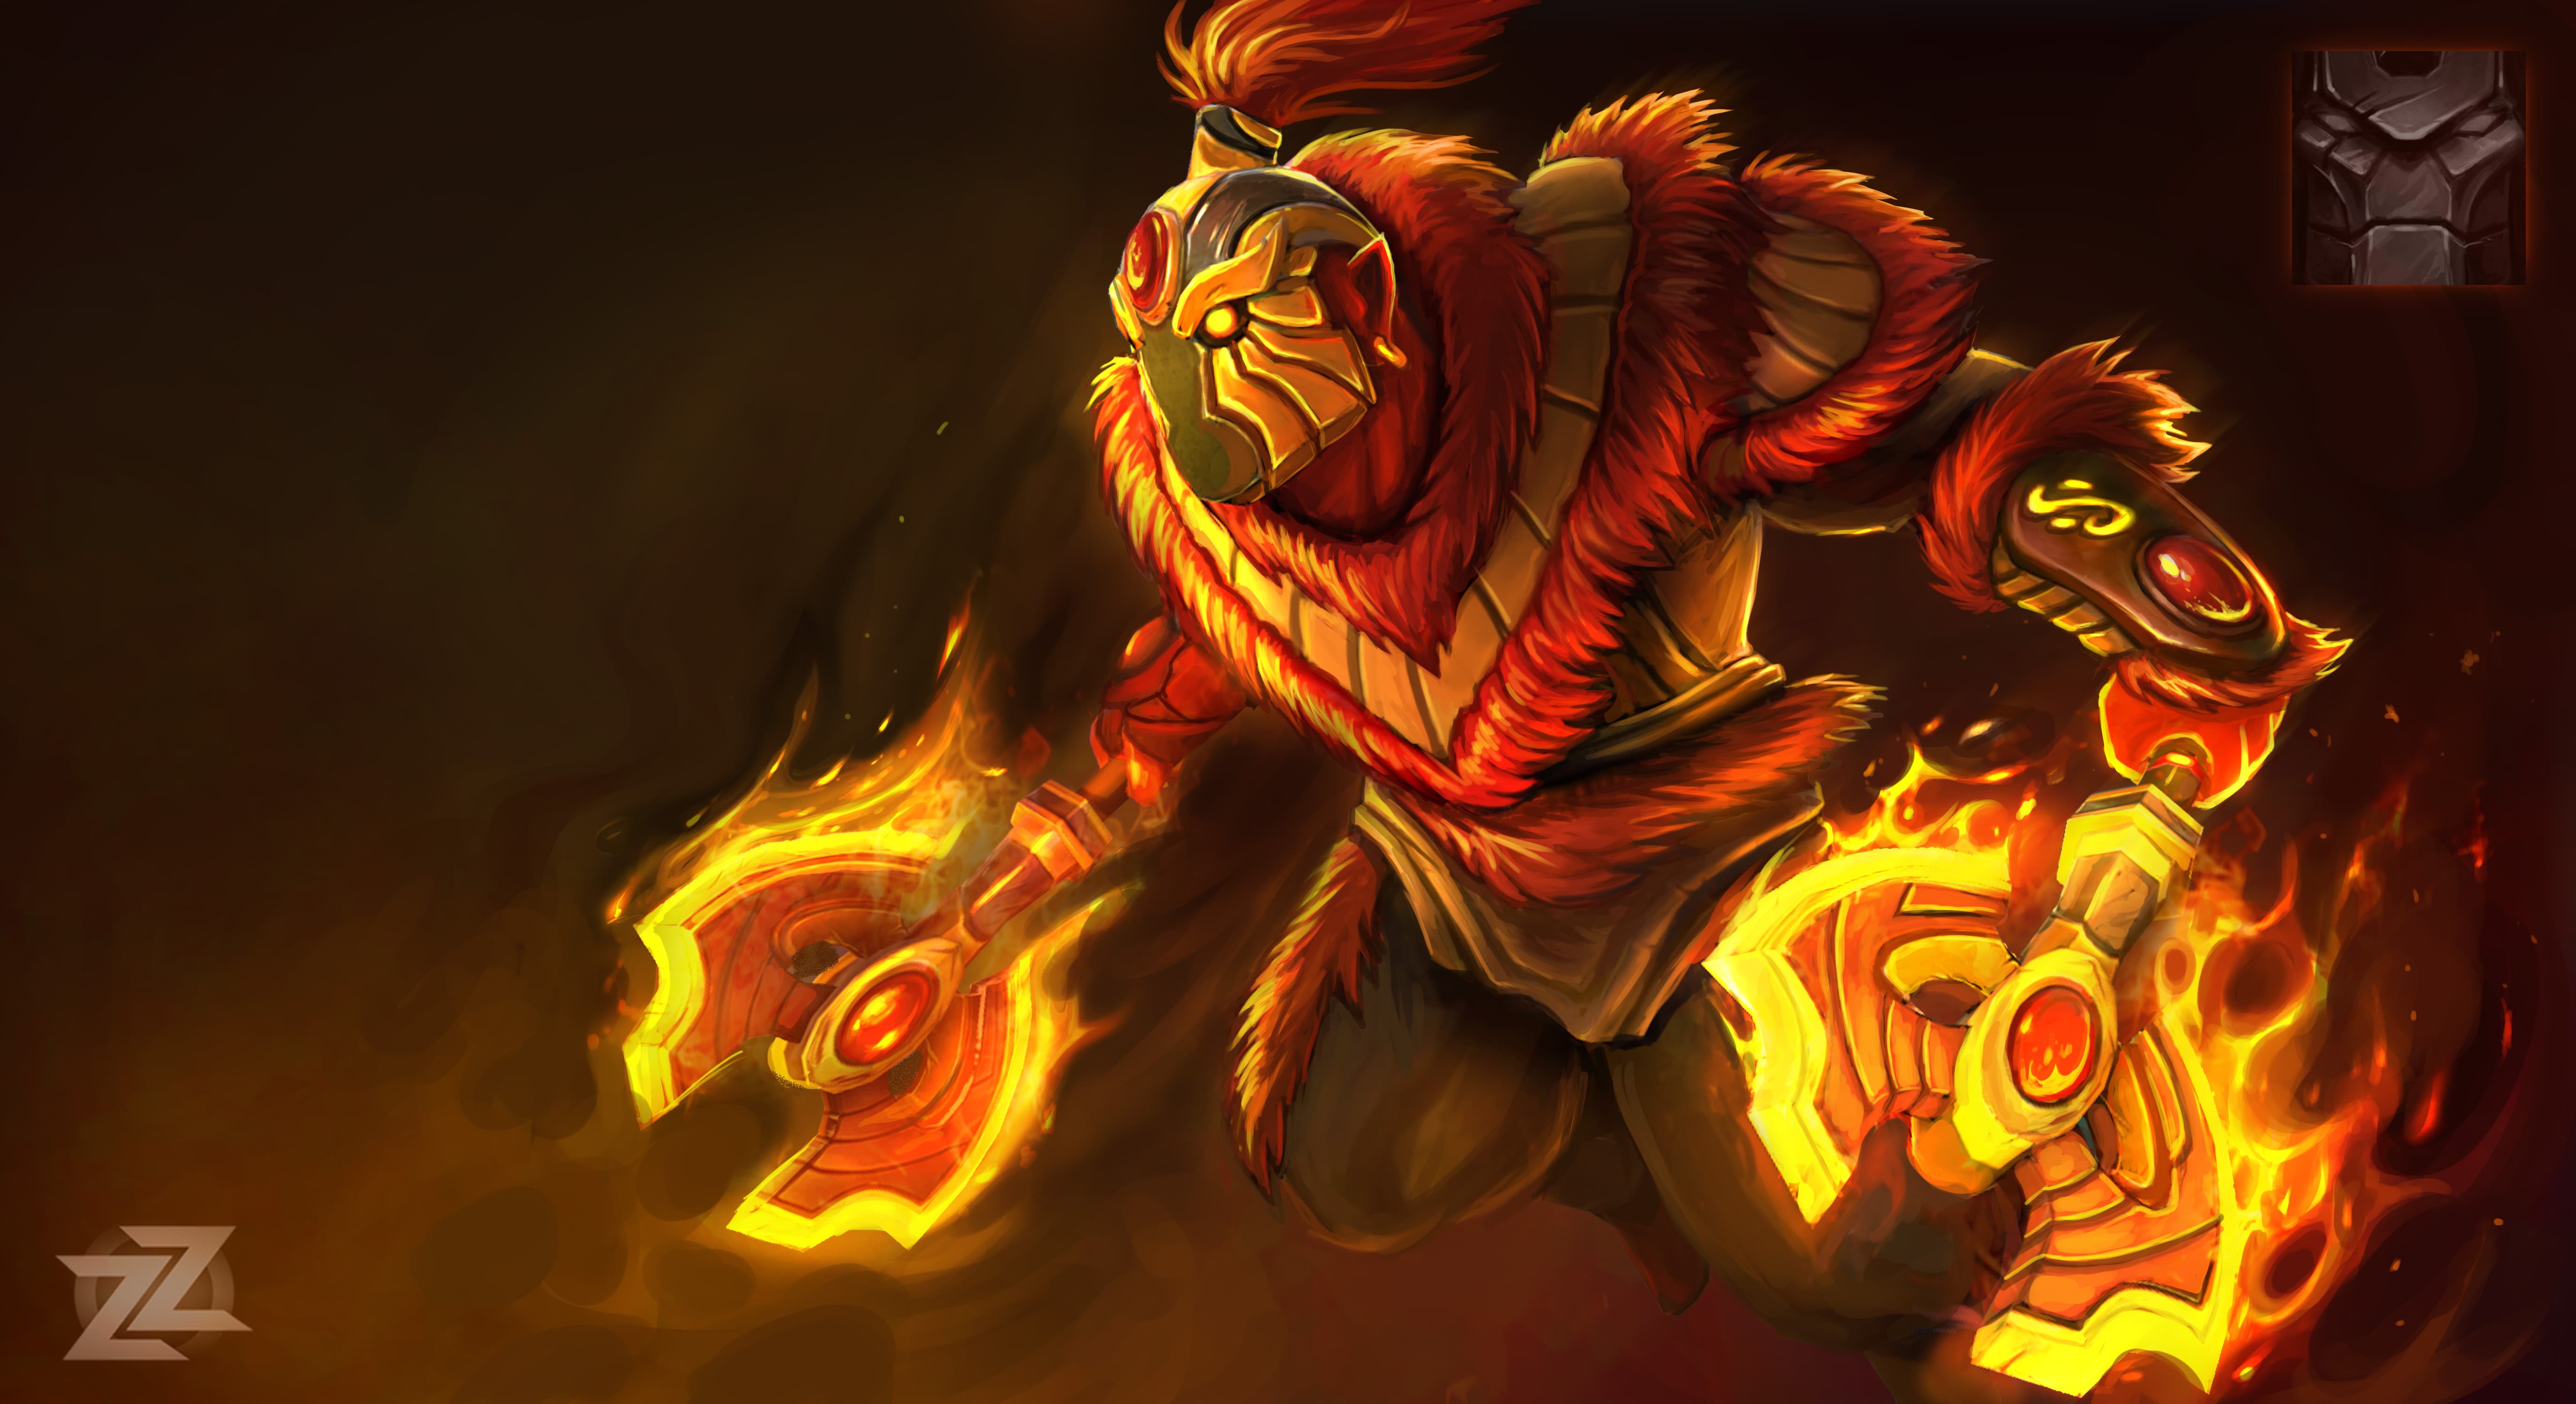 Dota 2, Steam (software), Defense of the Ancients, Video games, Ember Spirit, Axes Wallpaper